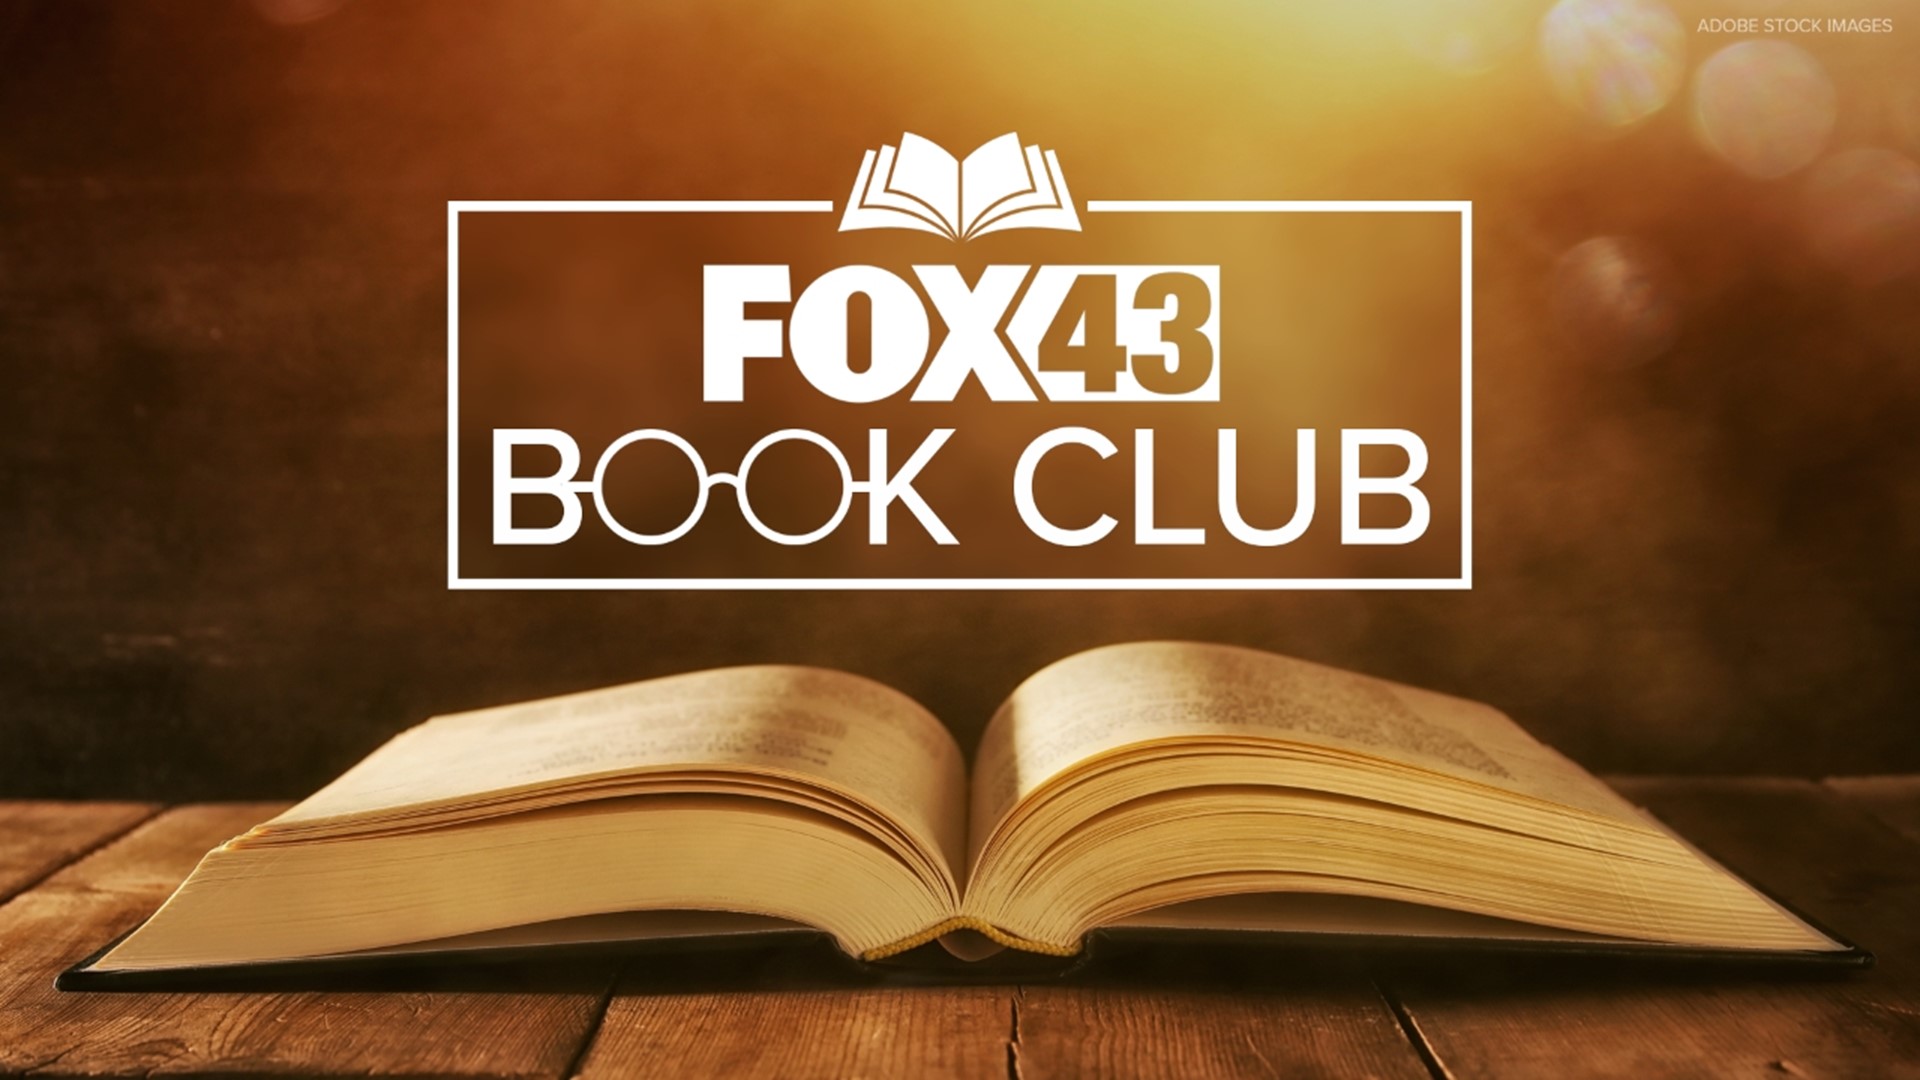 The FOX43 Book Club is aiming to bring together local readers, authors and librarians alike to celebrate literacy in Pennsylvania.